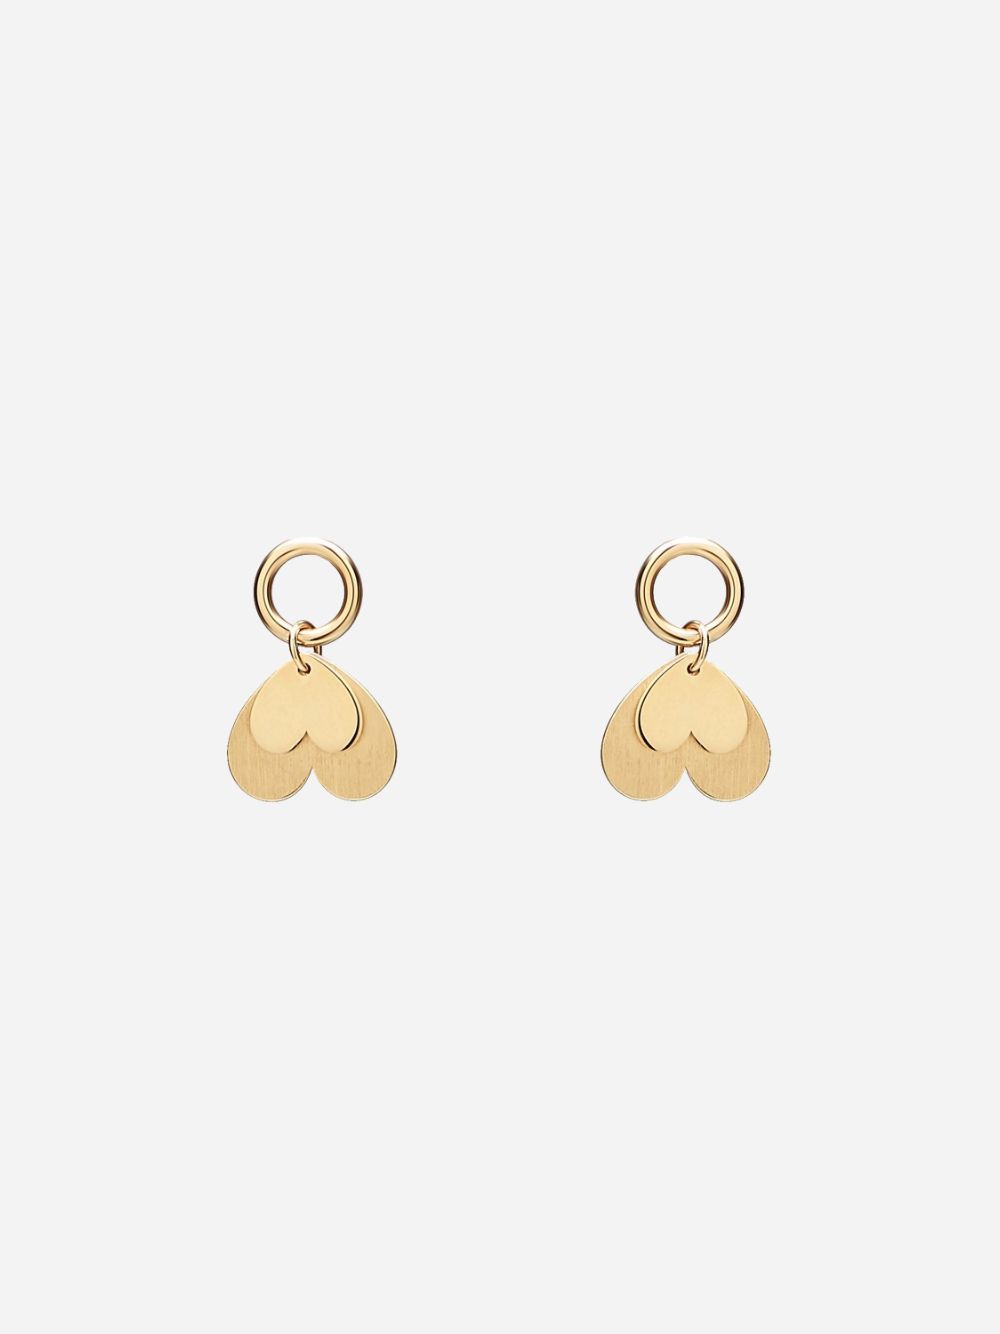 Love 2 Overlapping Hearts Gold Earrings